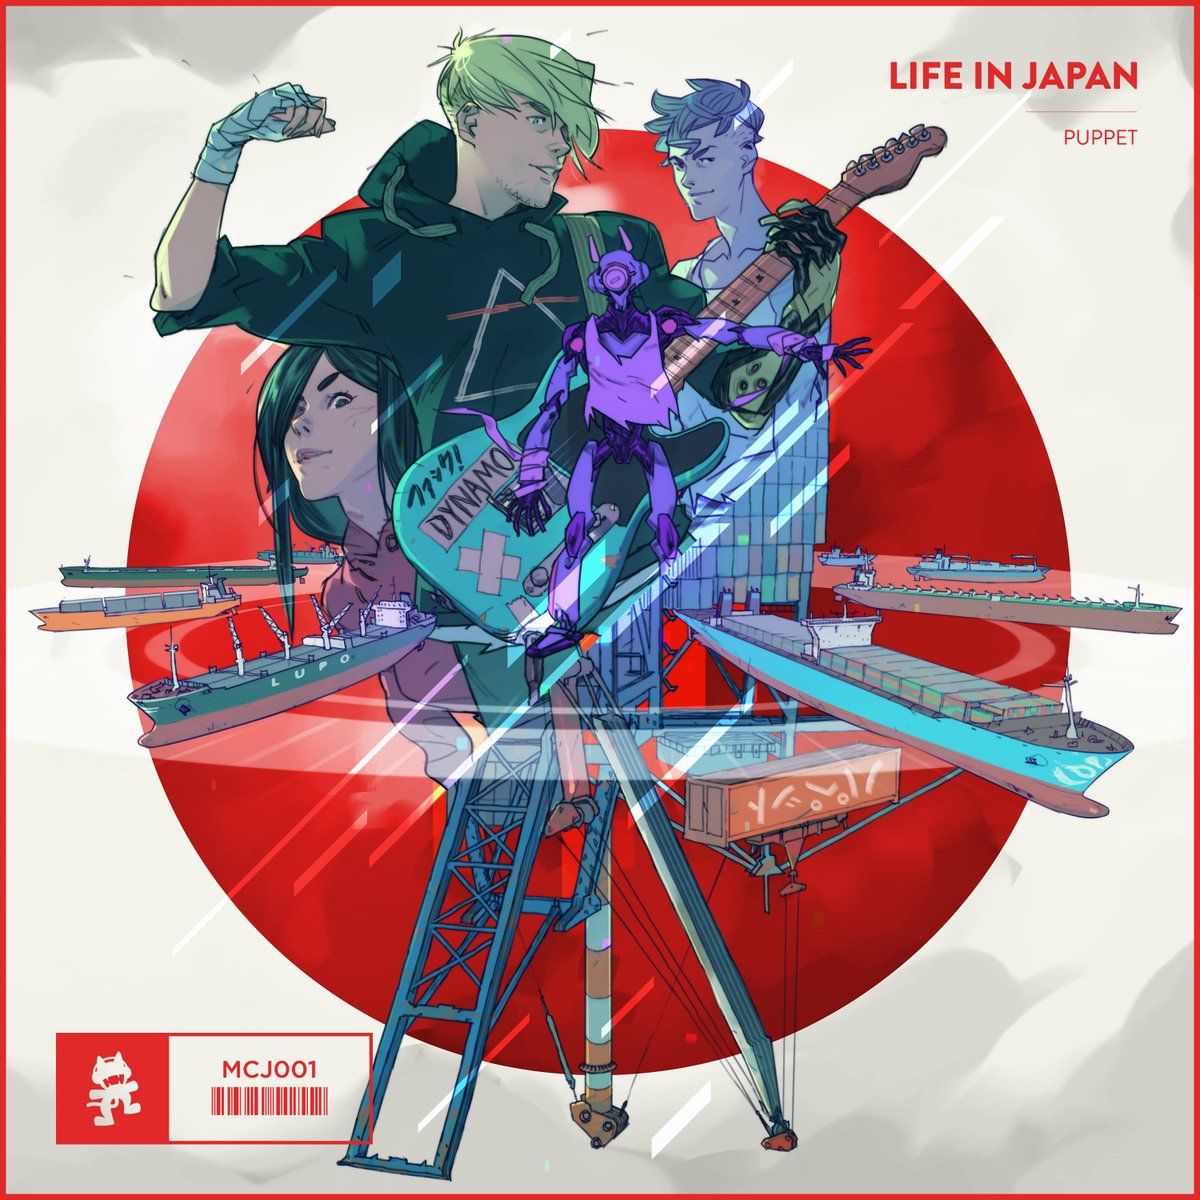 Puppet - To Be Alive (Feat. Aaron Richards) [Monstercat Release] (신비, 활기, 희망, 격렬, 비트, 일렉)